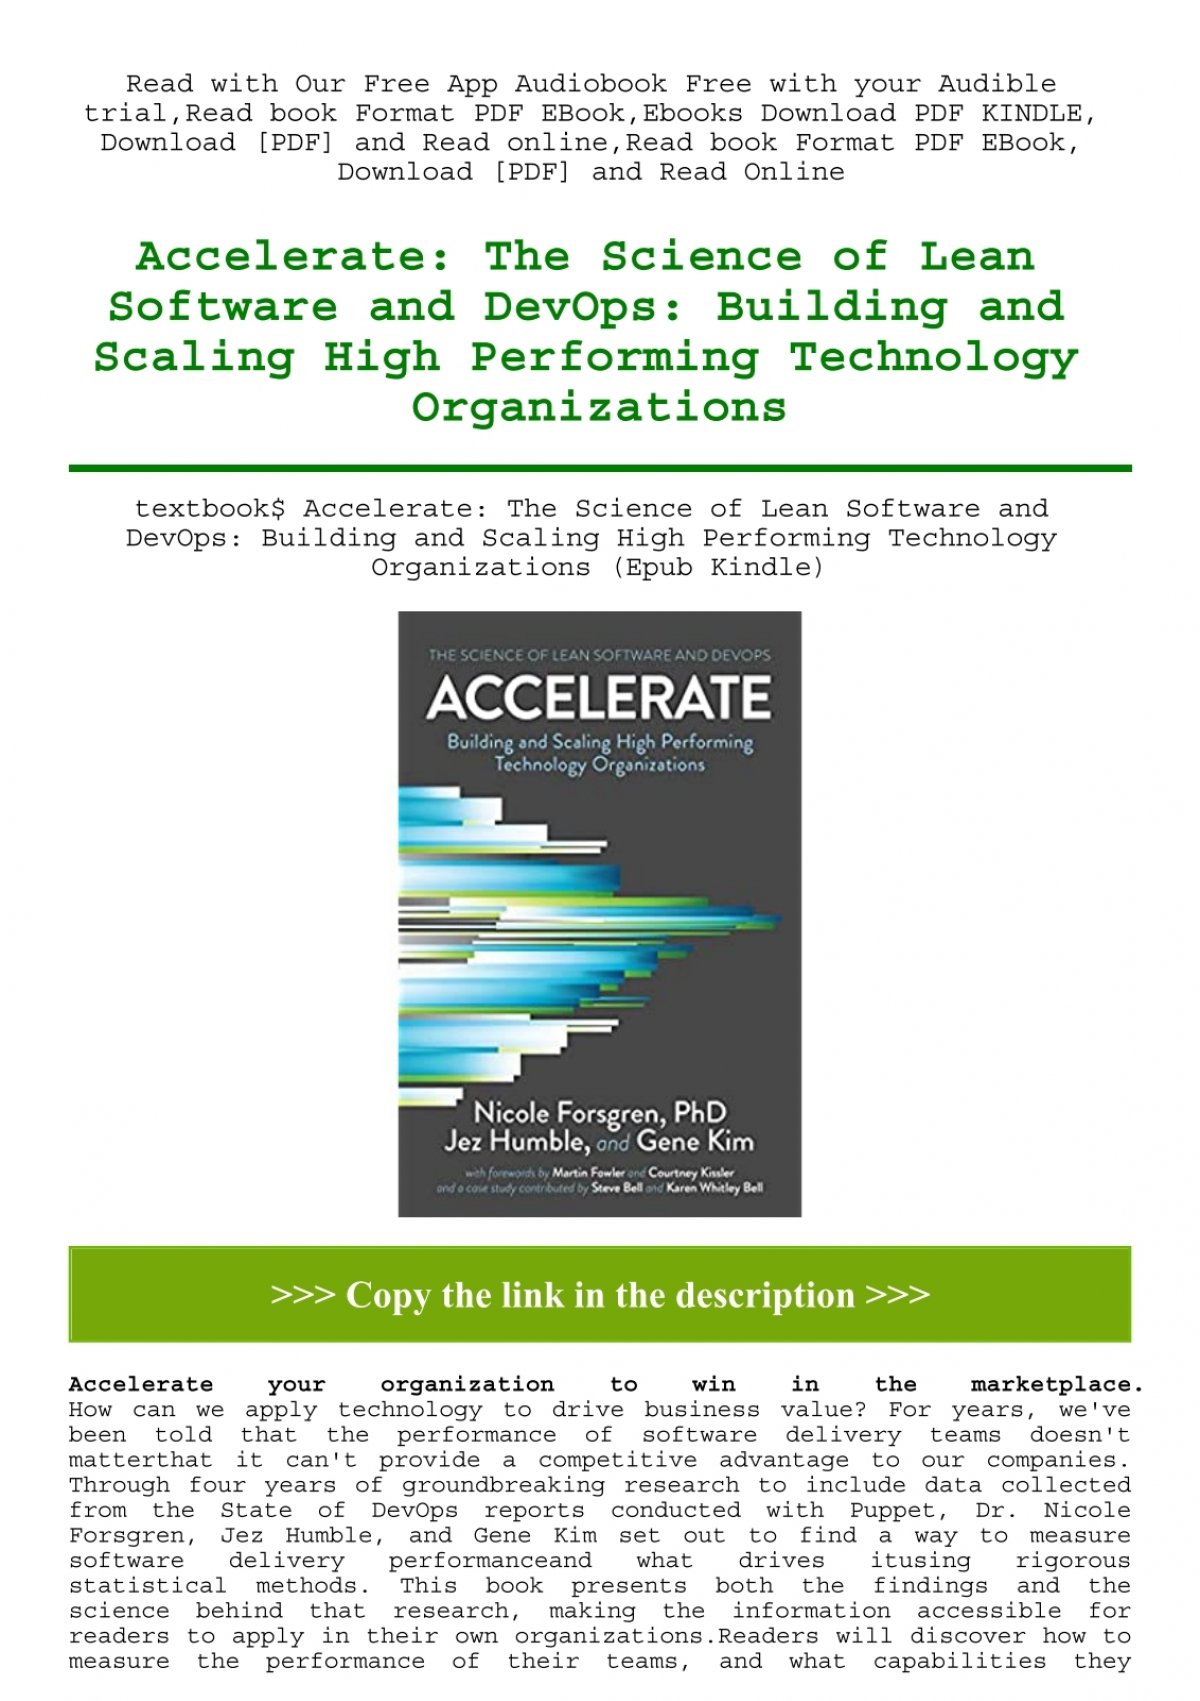 textbook$ Accelerate The Science of Lean Software and DevOps Building and Scaling  High Performing Technology Organizations (Epub Kindle)